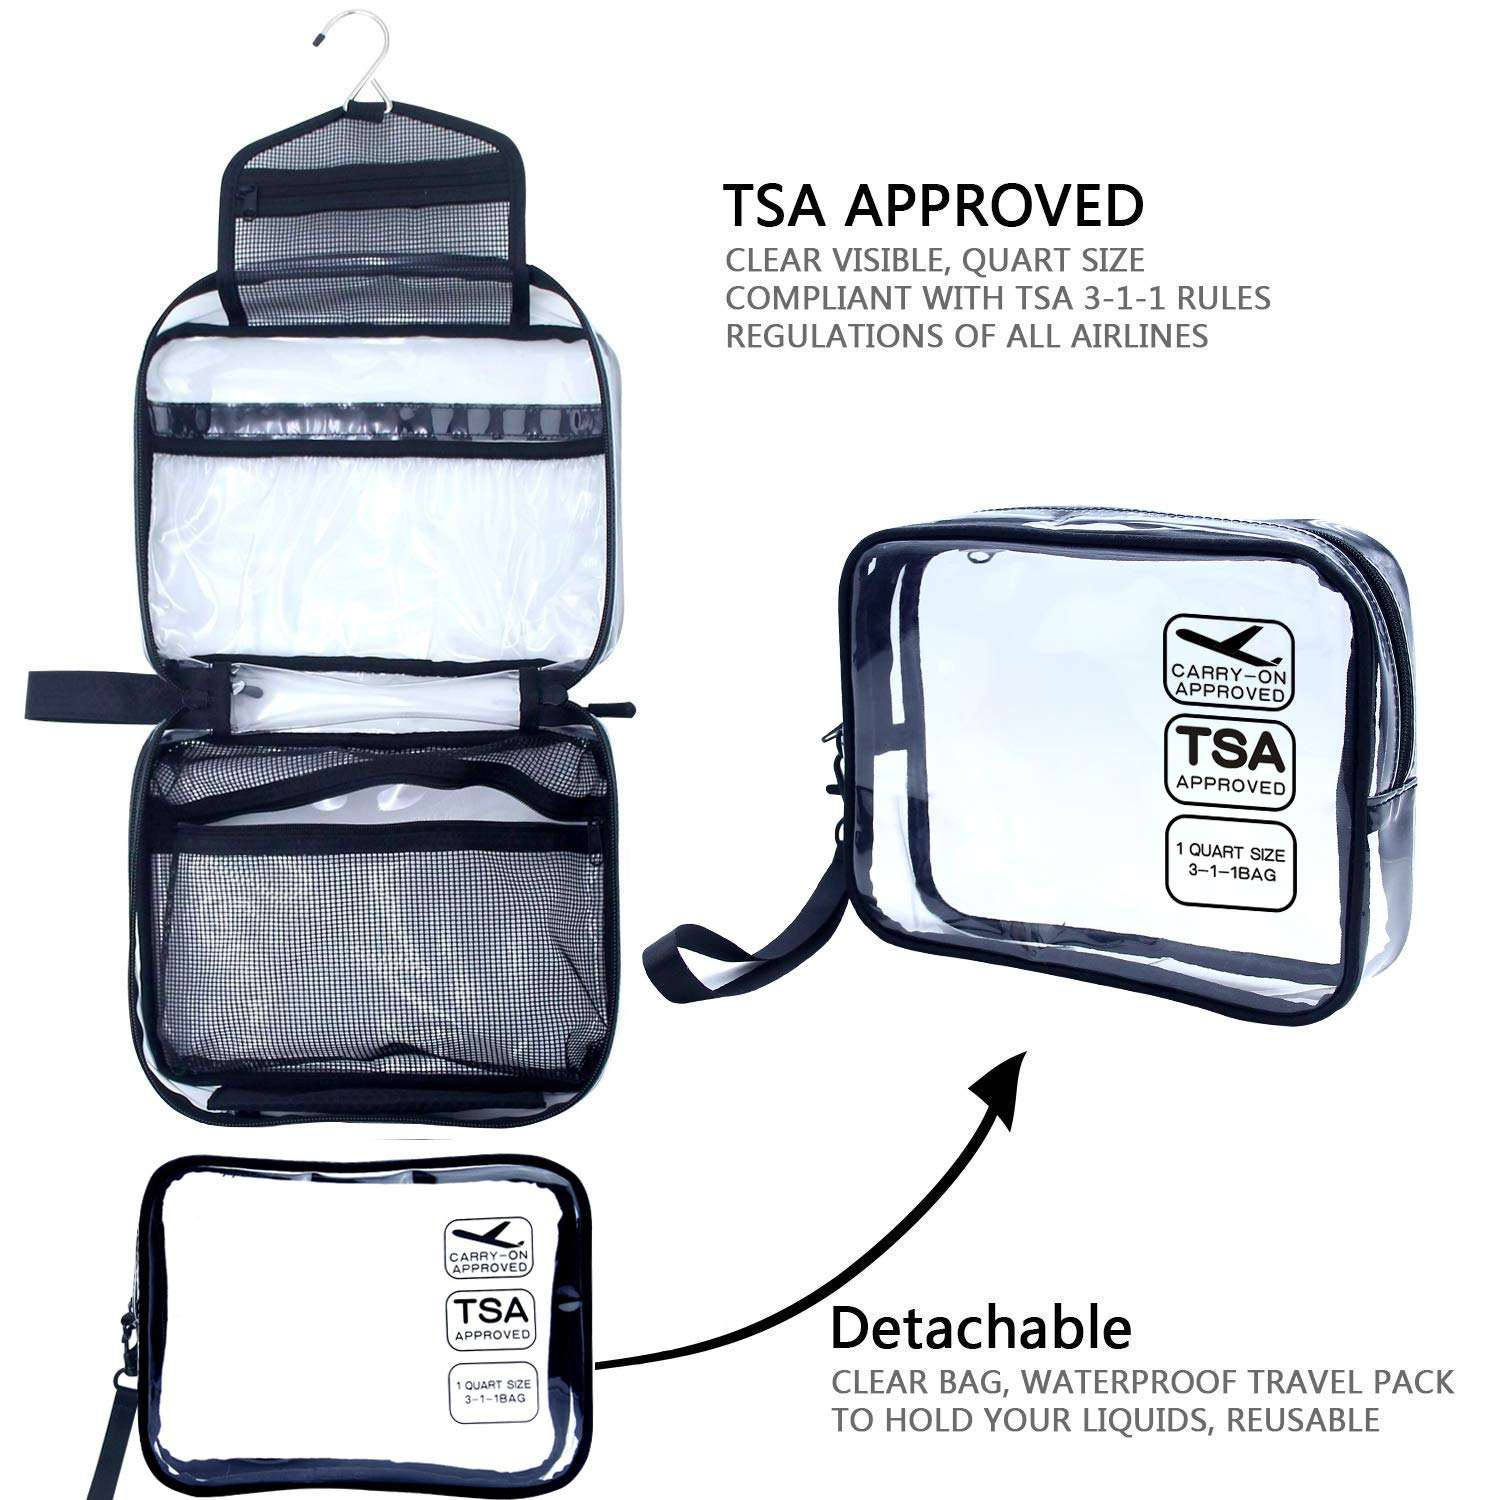 Hanging Toiletry Bag, Clear Travel Toiletry Bag with Detachable TSA Approved Small Clear Bag Airline 3-1-1 Carry On Compliant Ba